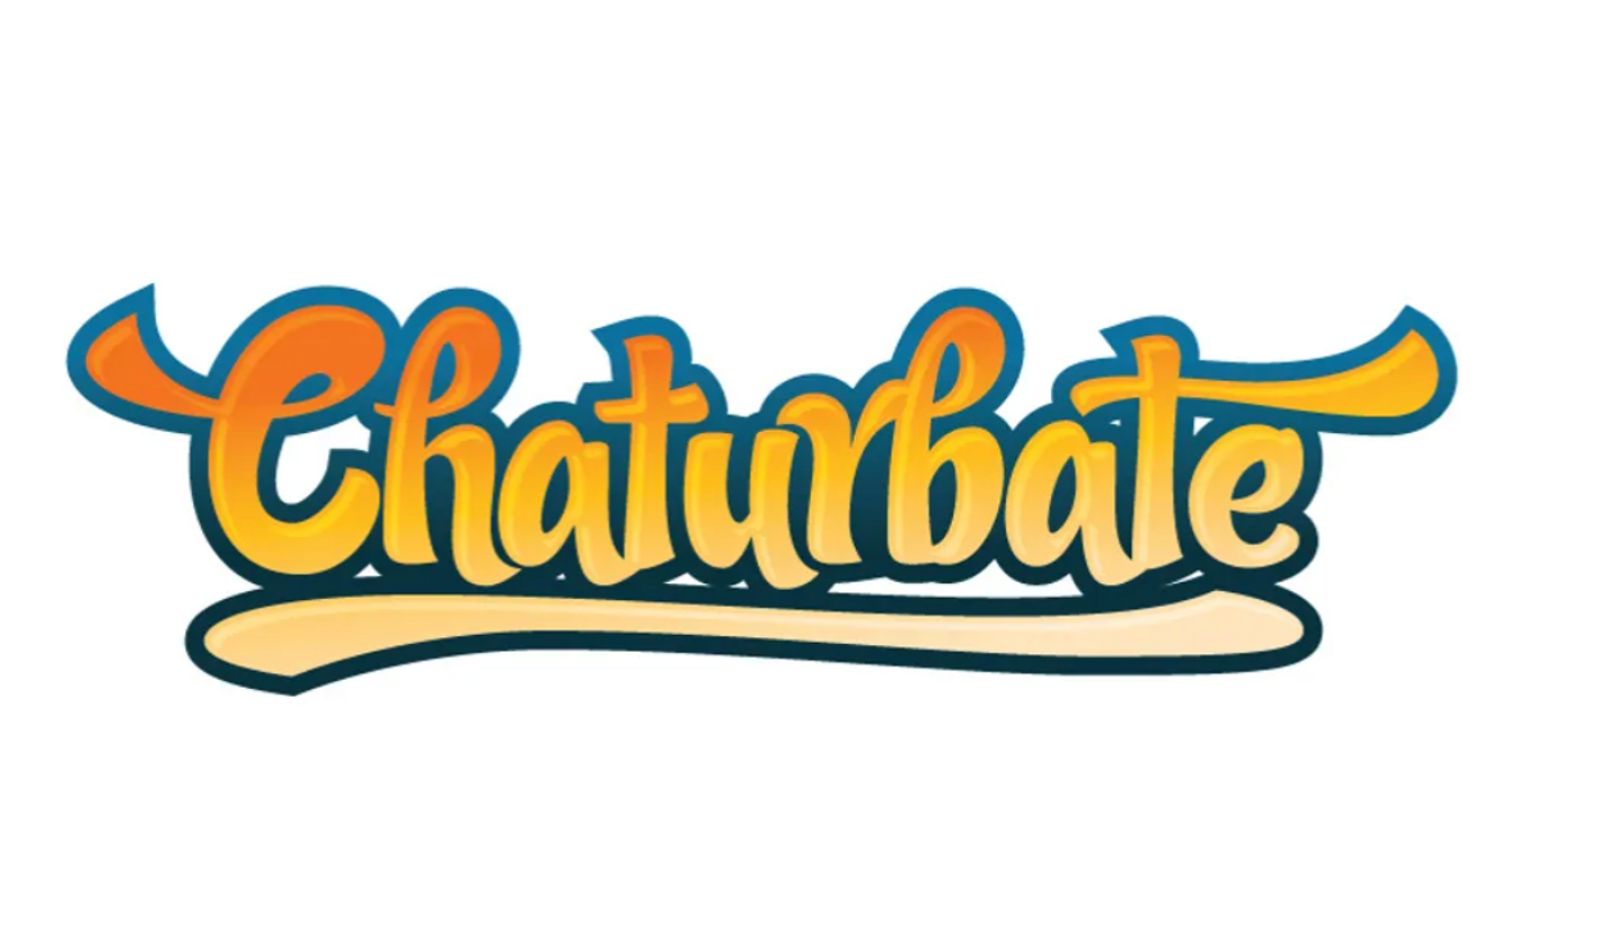 Chaturbate Wins Best Live Affiliate Program at GFY Awards